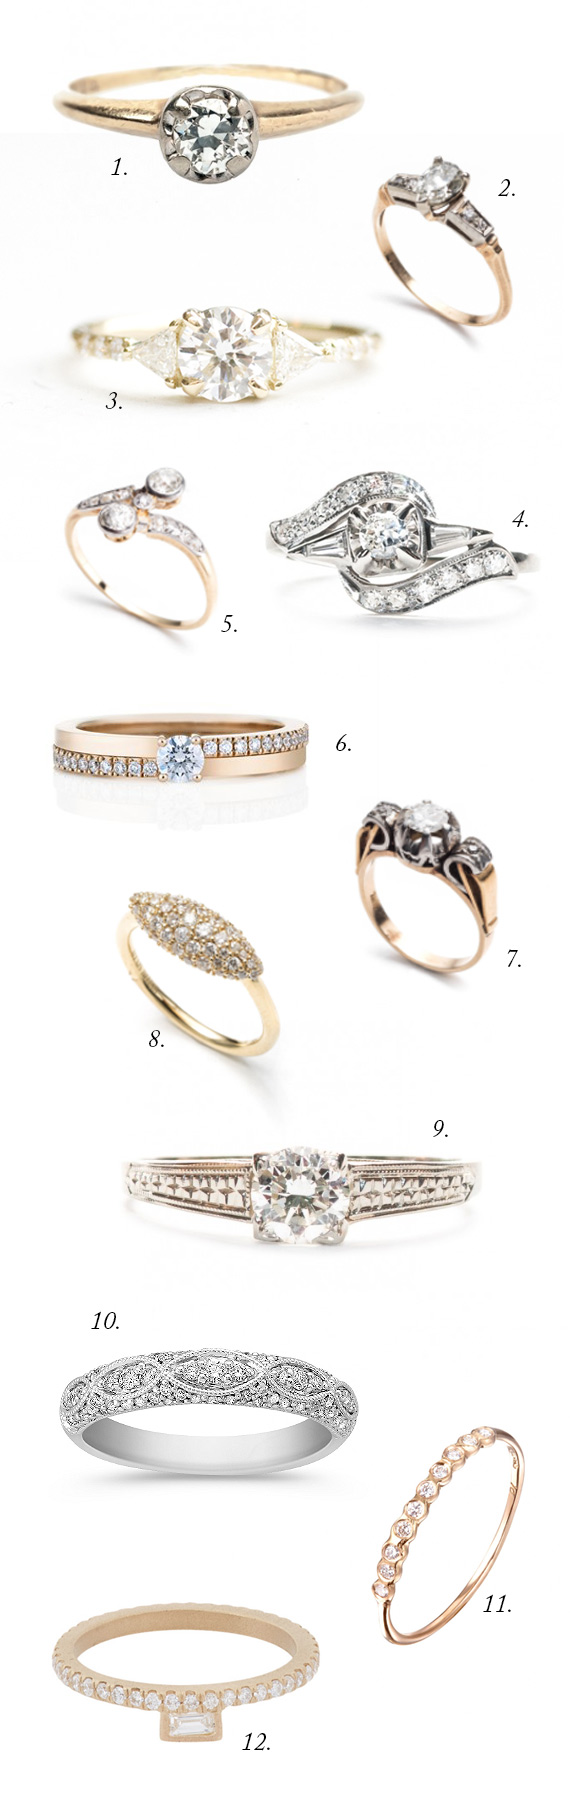 Our favorite unique engagement rings | Jewelers Mutual insurance | 100 Layer Cake